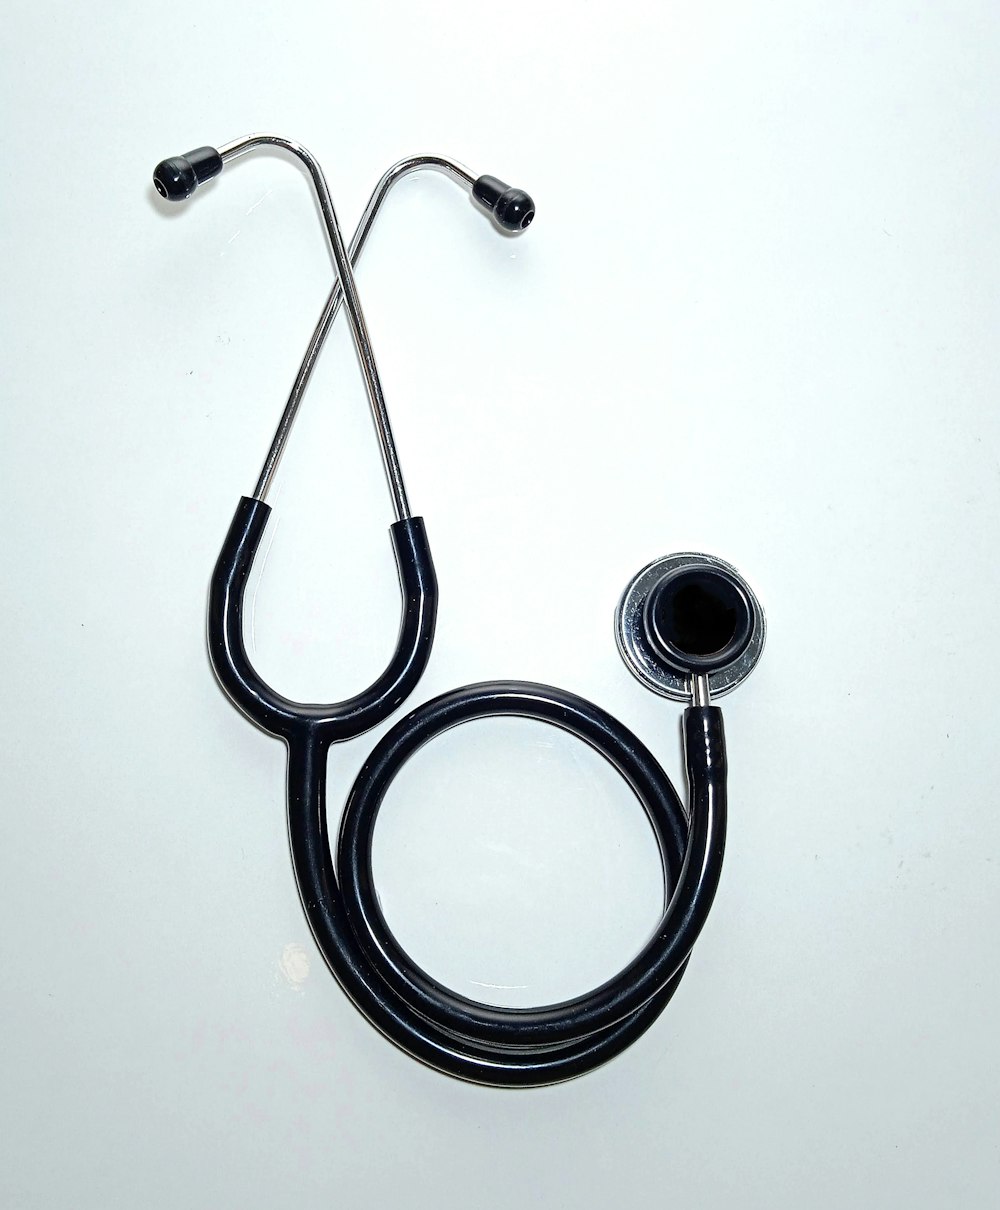 black and silver stethoscope on white surface